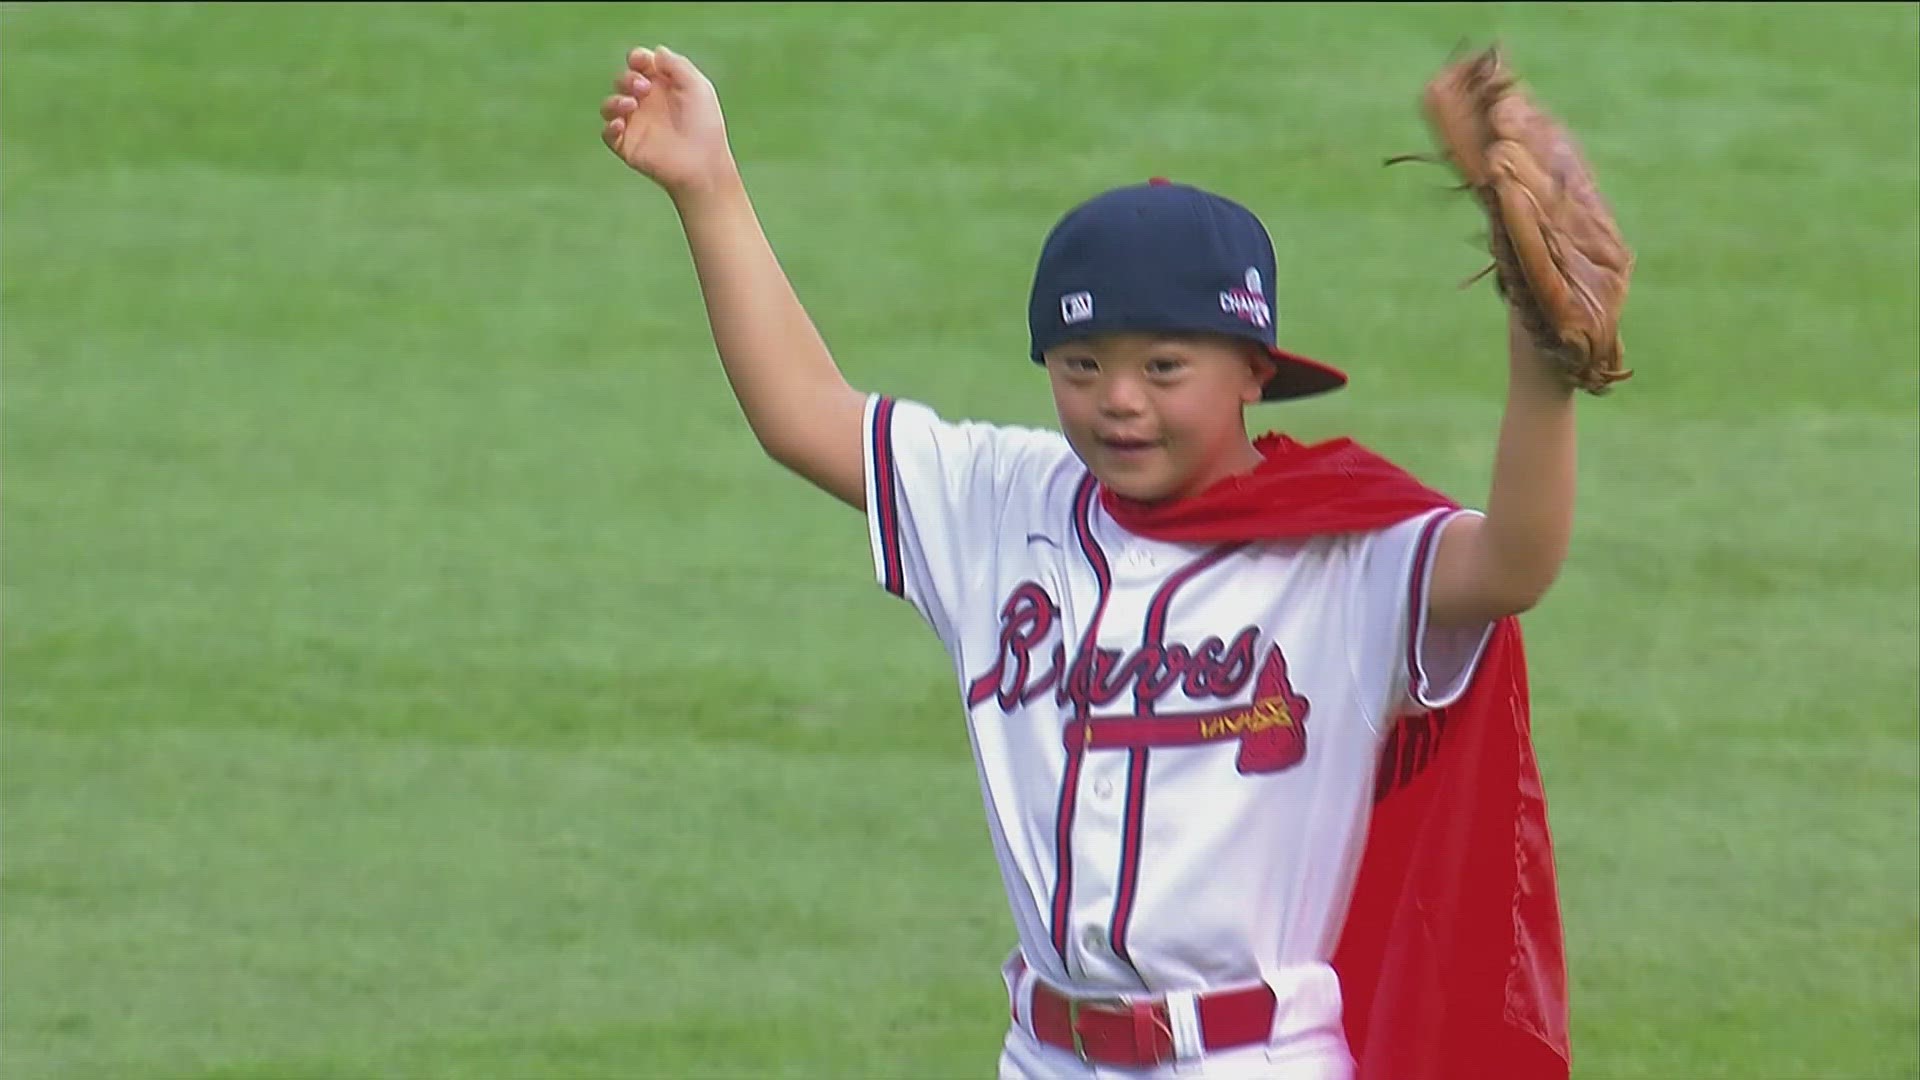 Cooper Murray is traveling the country, throwing out the first pitch at all 30 MLB Stadiums to try and get other kids like him adopted from foster care.